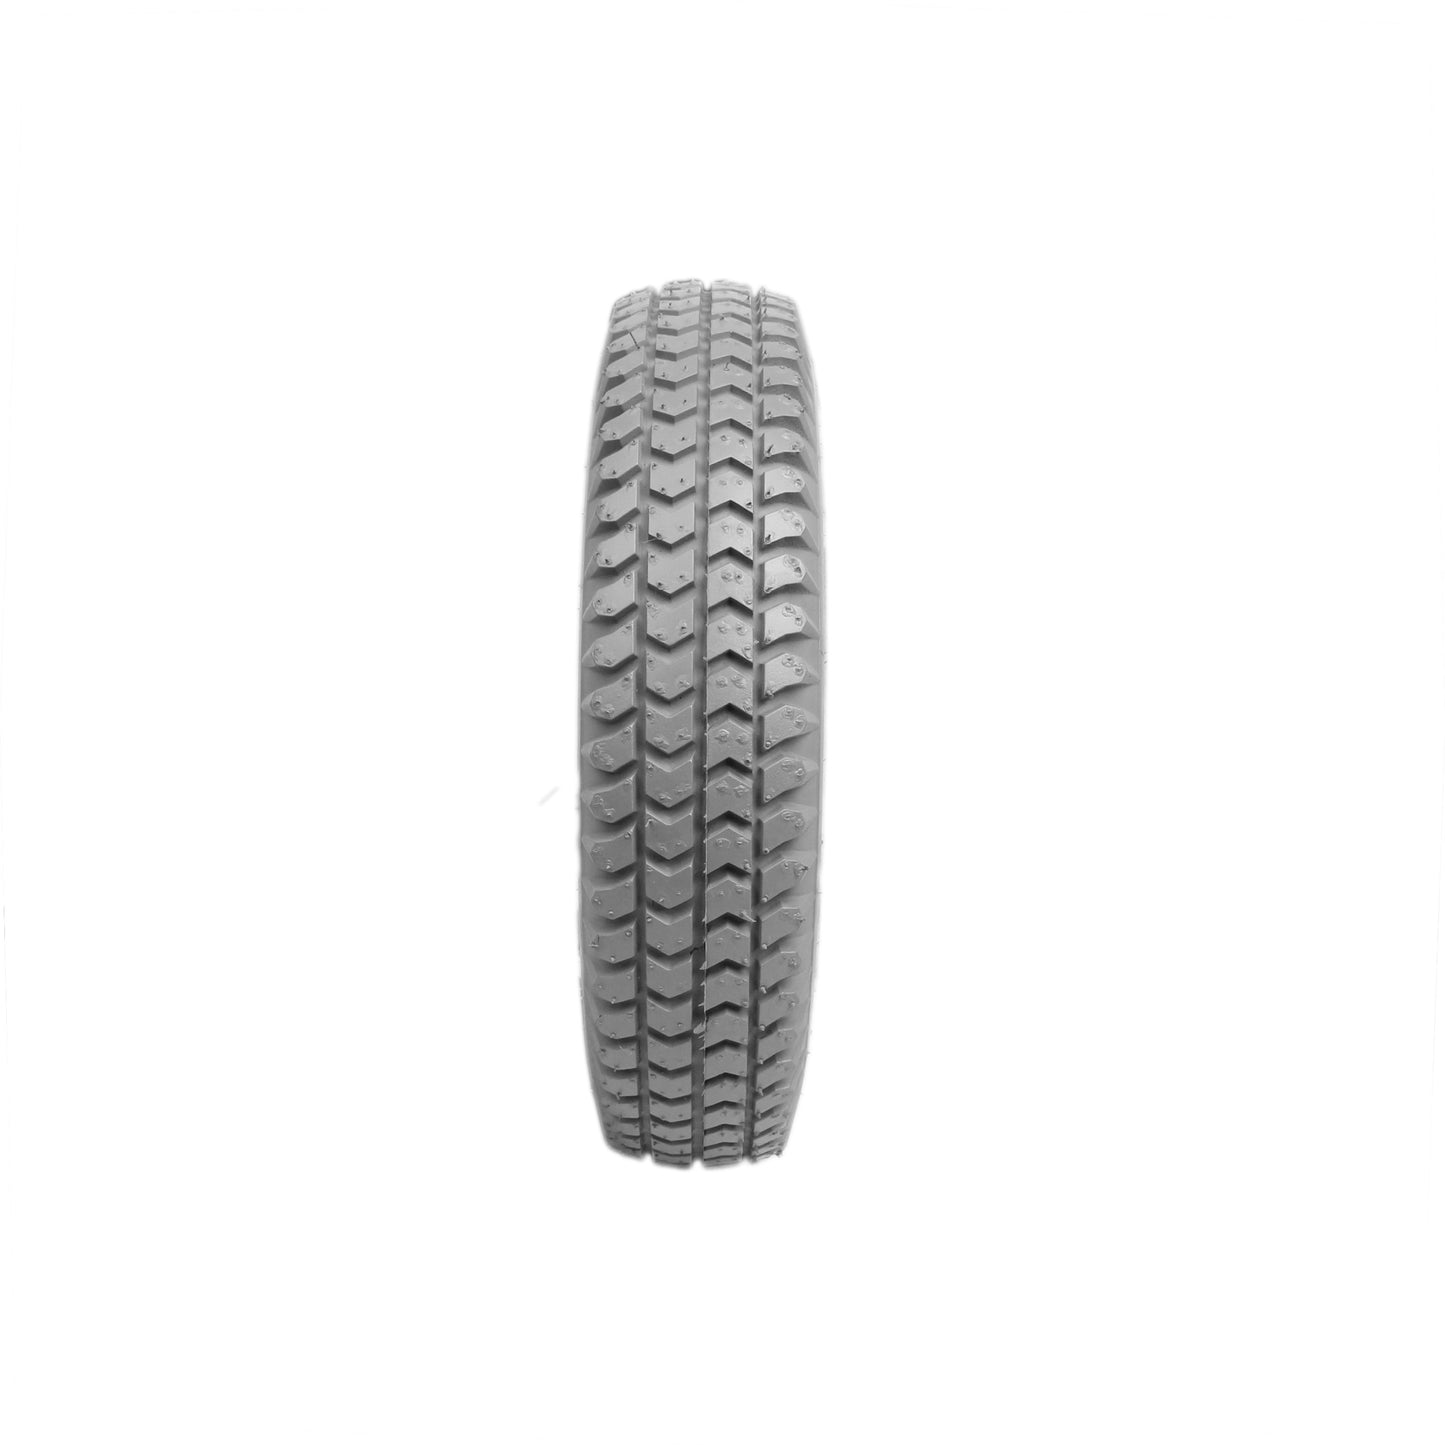 3.00-8" (14x3") Dark Grey (Charcoal) All Weather Tire